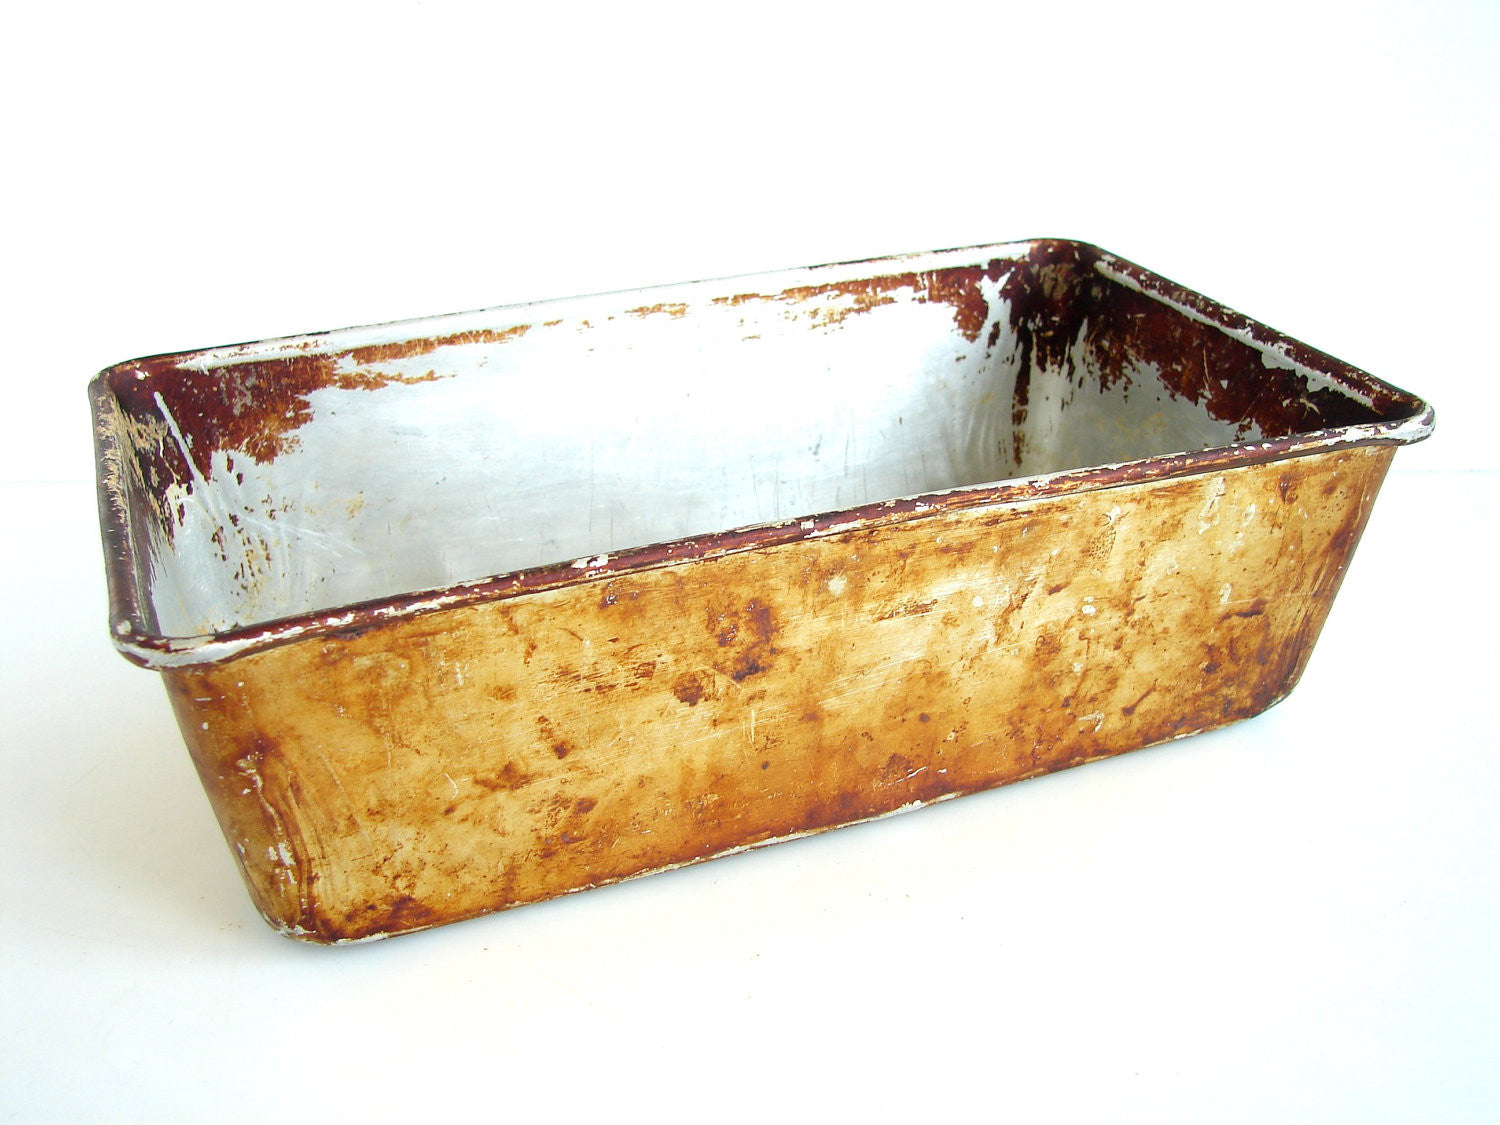 Vintage Metal Bread Loaf Baking Pan / Tin with Unique Baked-on Patina –